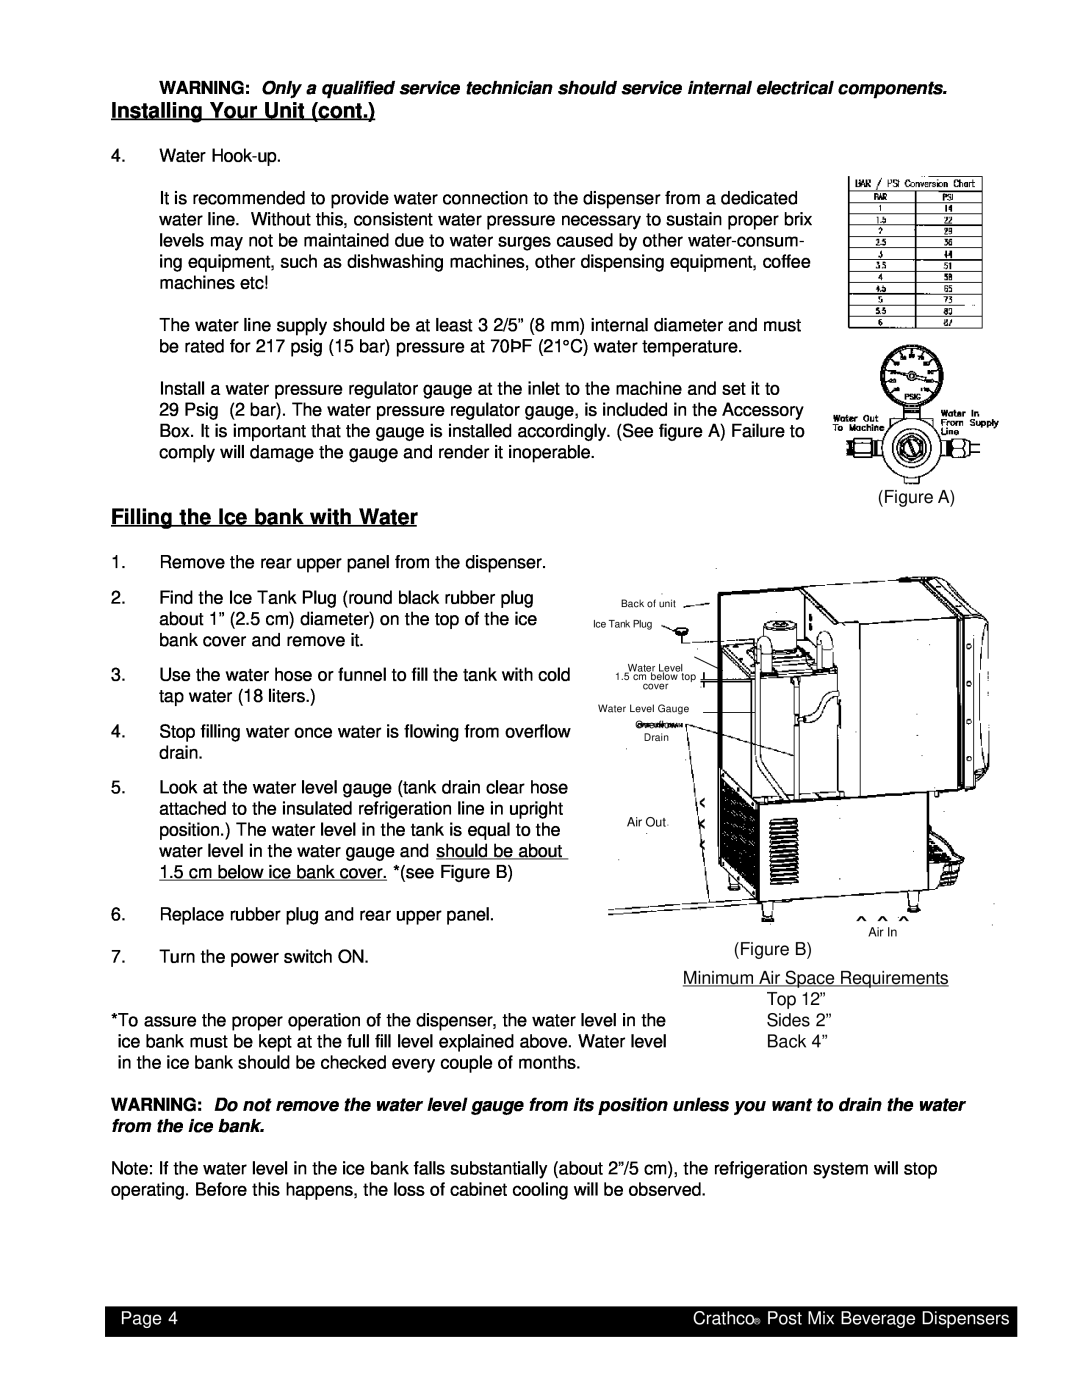 Grindmaster PM4-B, PM45-B instruction manual Installing Your Unit cont, Filling the Ice bank with Water, › › ›, Page 